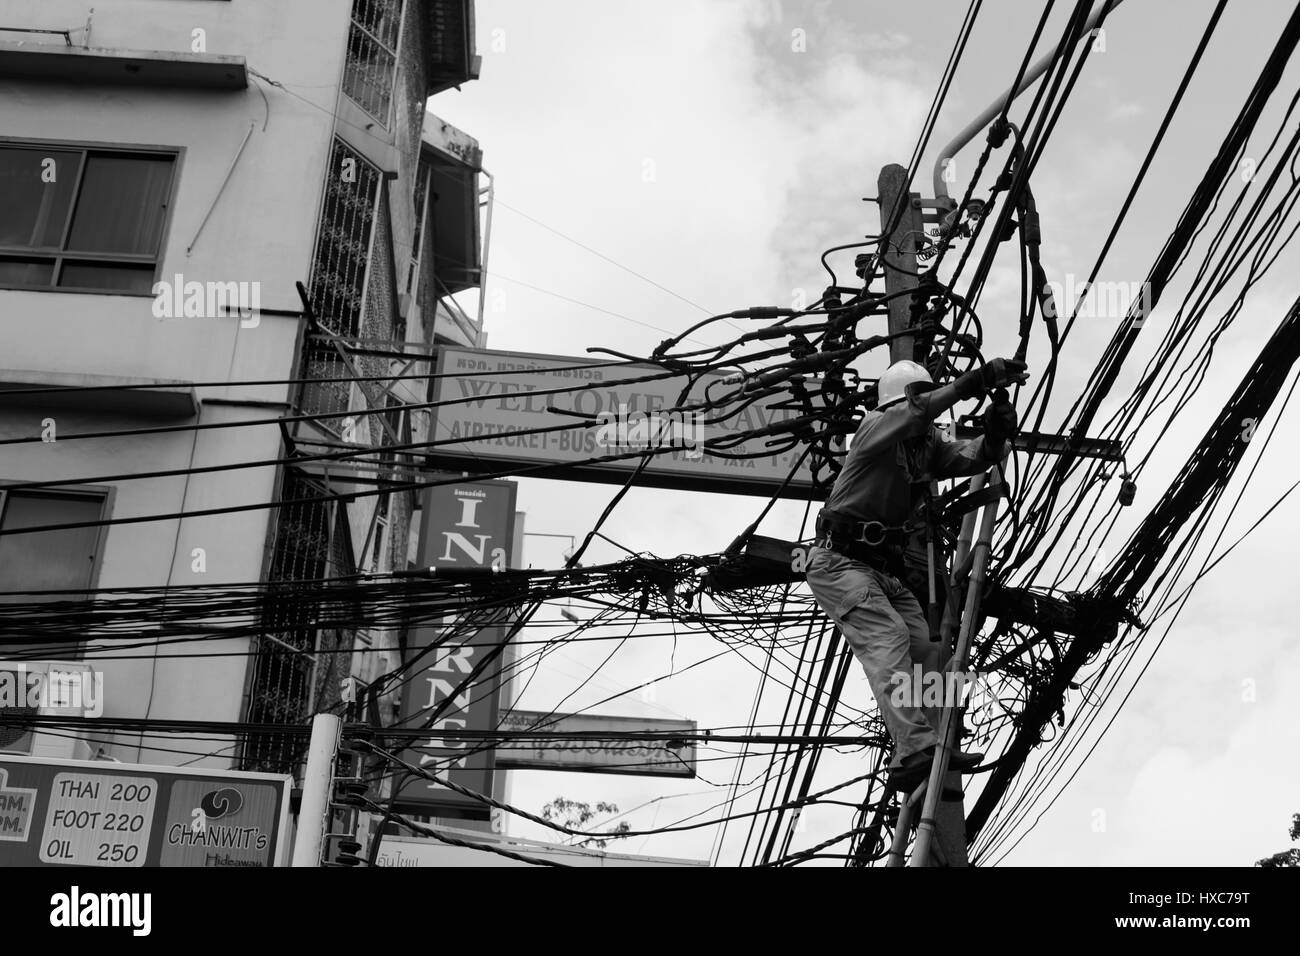 An electrician is maintaining the twisted lines of electricity wires on the street somewhere in Thailand. Stock Photo